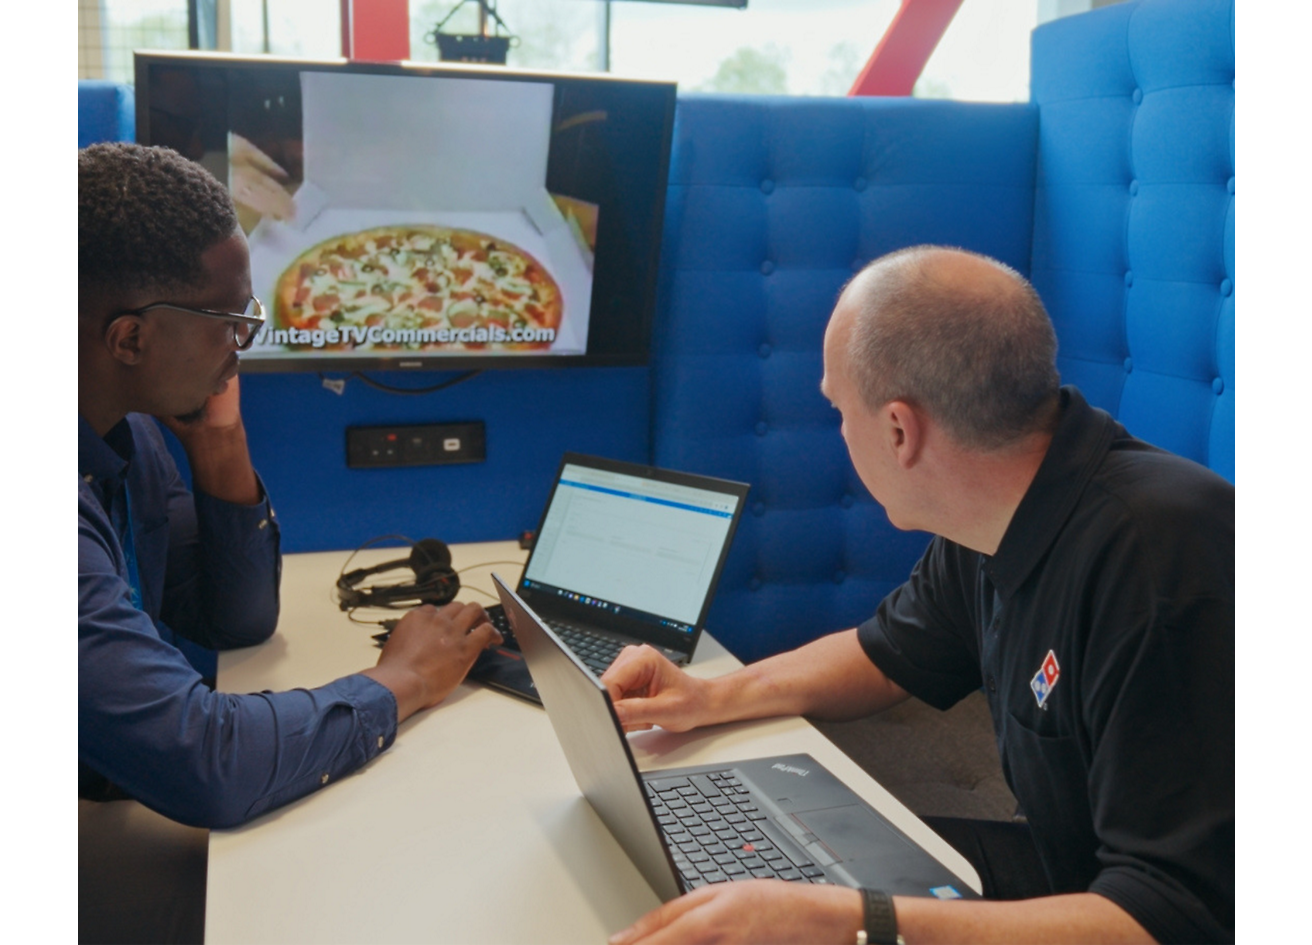 Two persons sitting with laptop and discussing about Dominos pizza